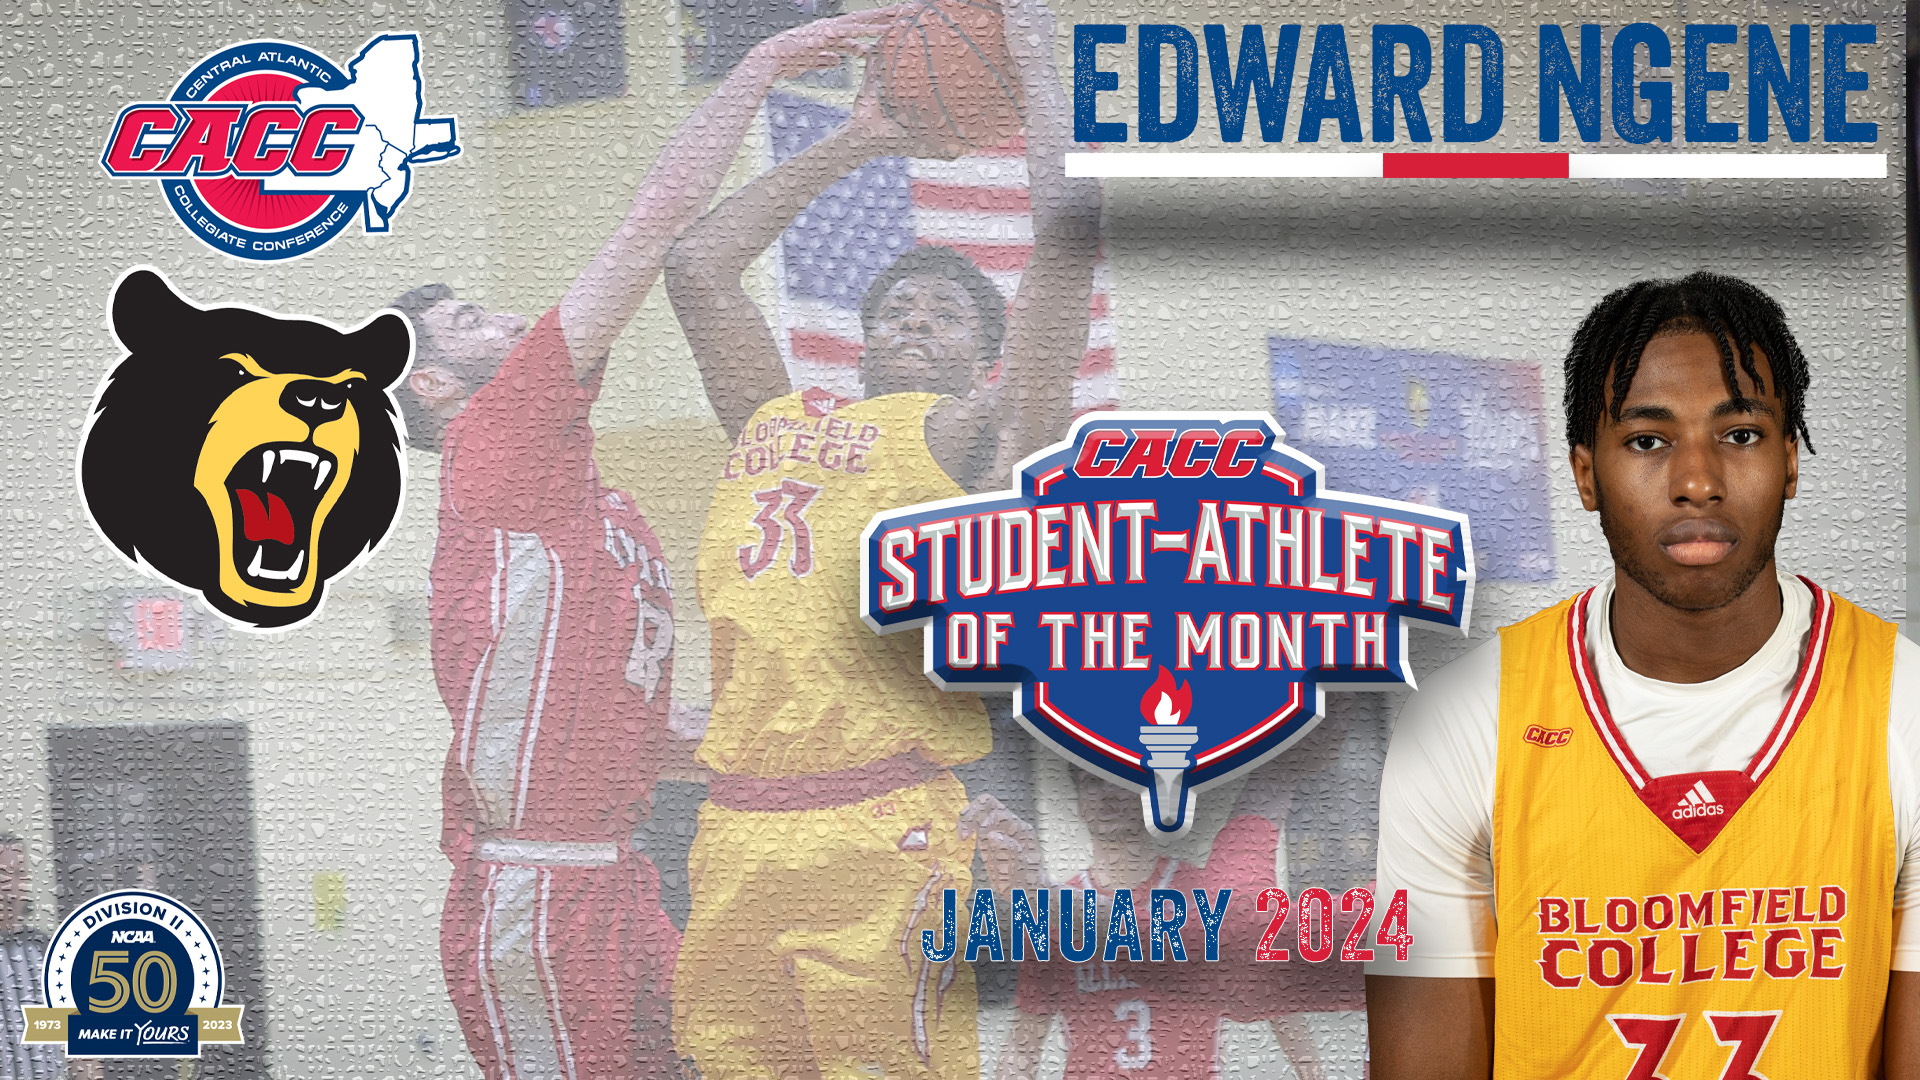 Bloomfield's Edward Ngene Named CACC S-A of the Month for January